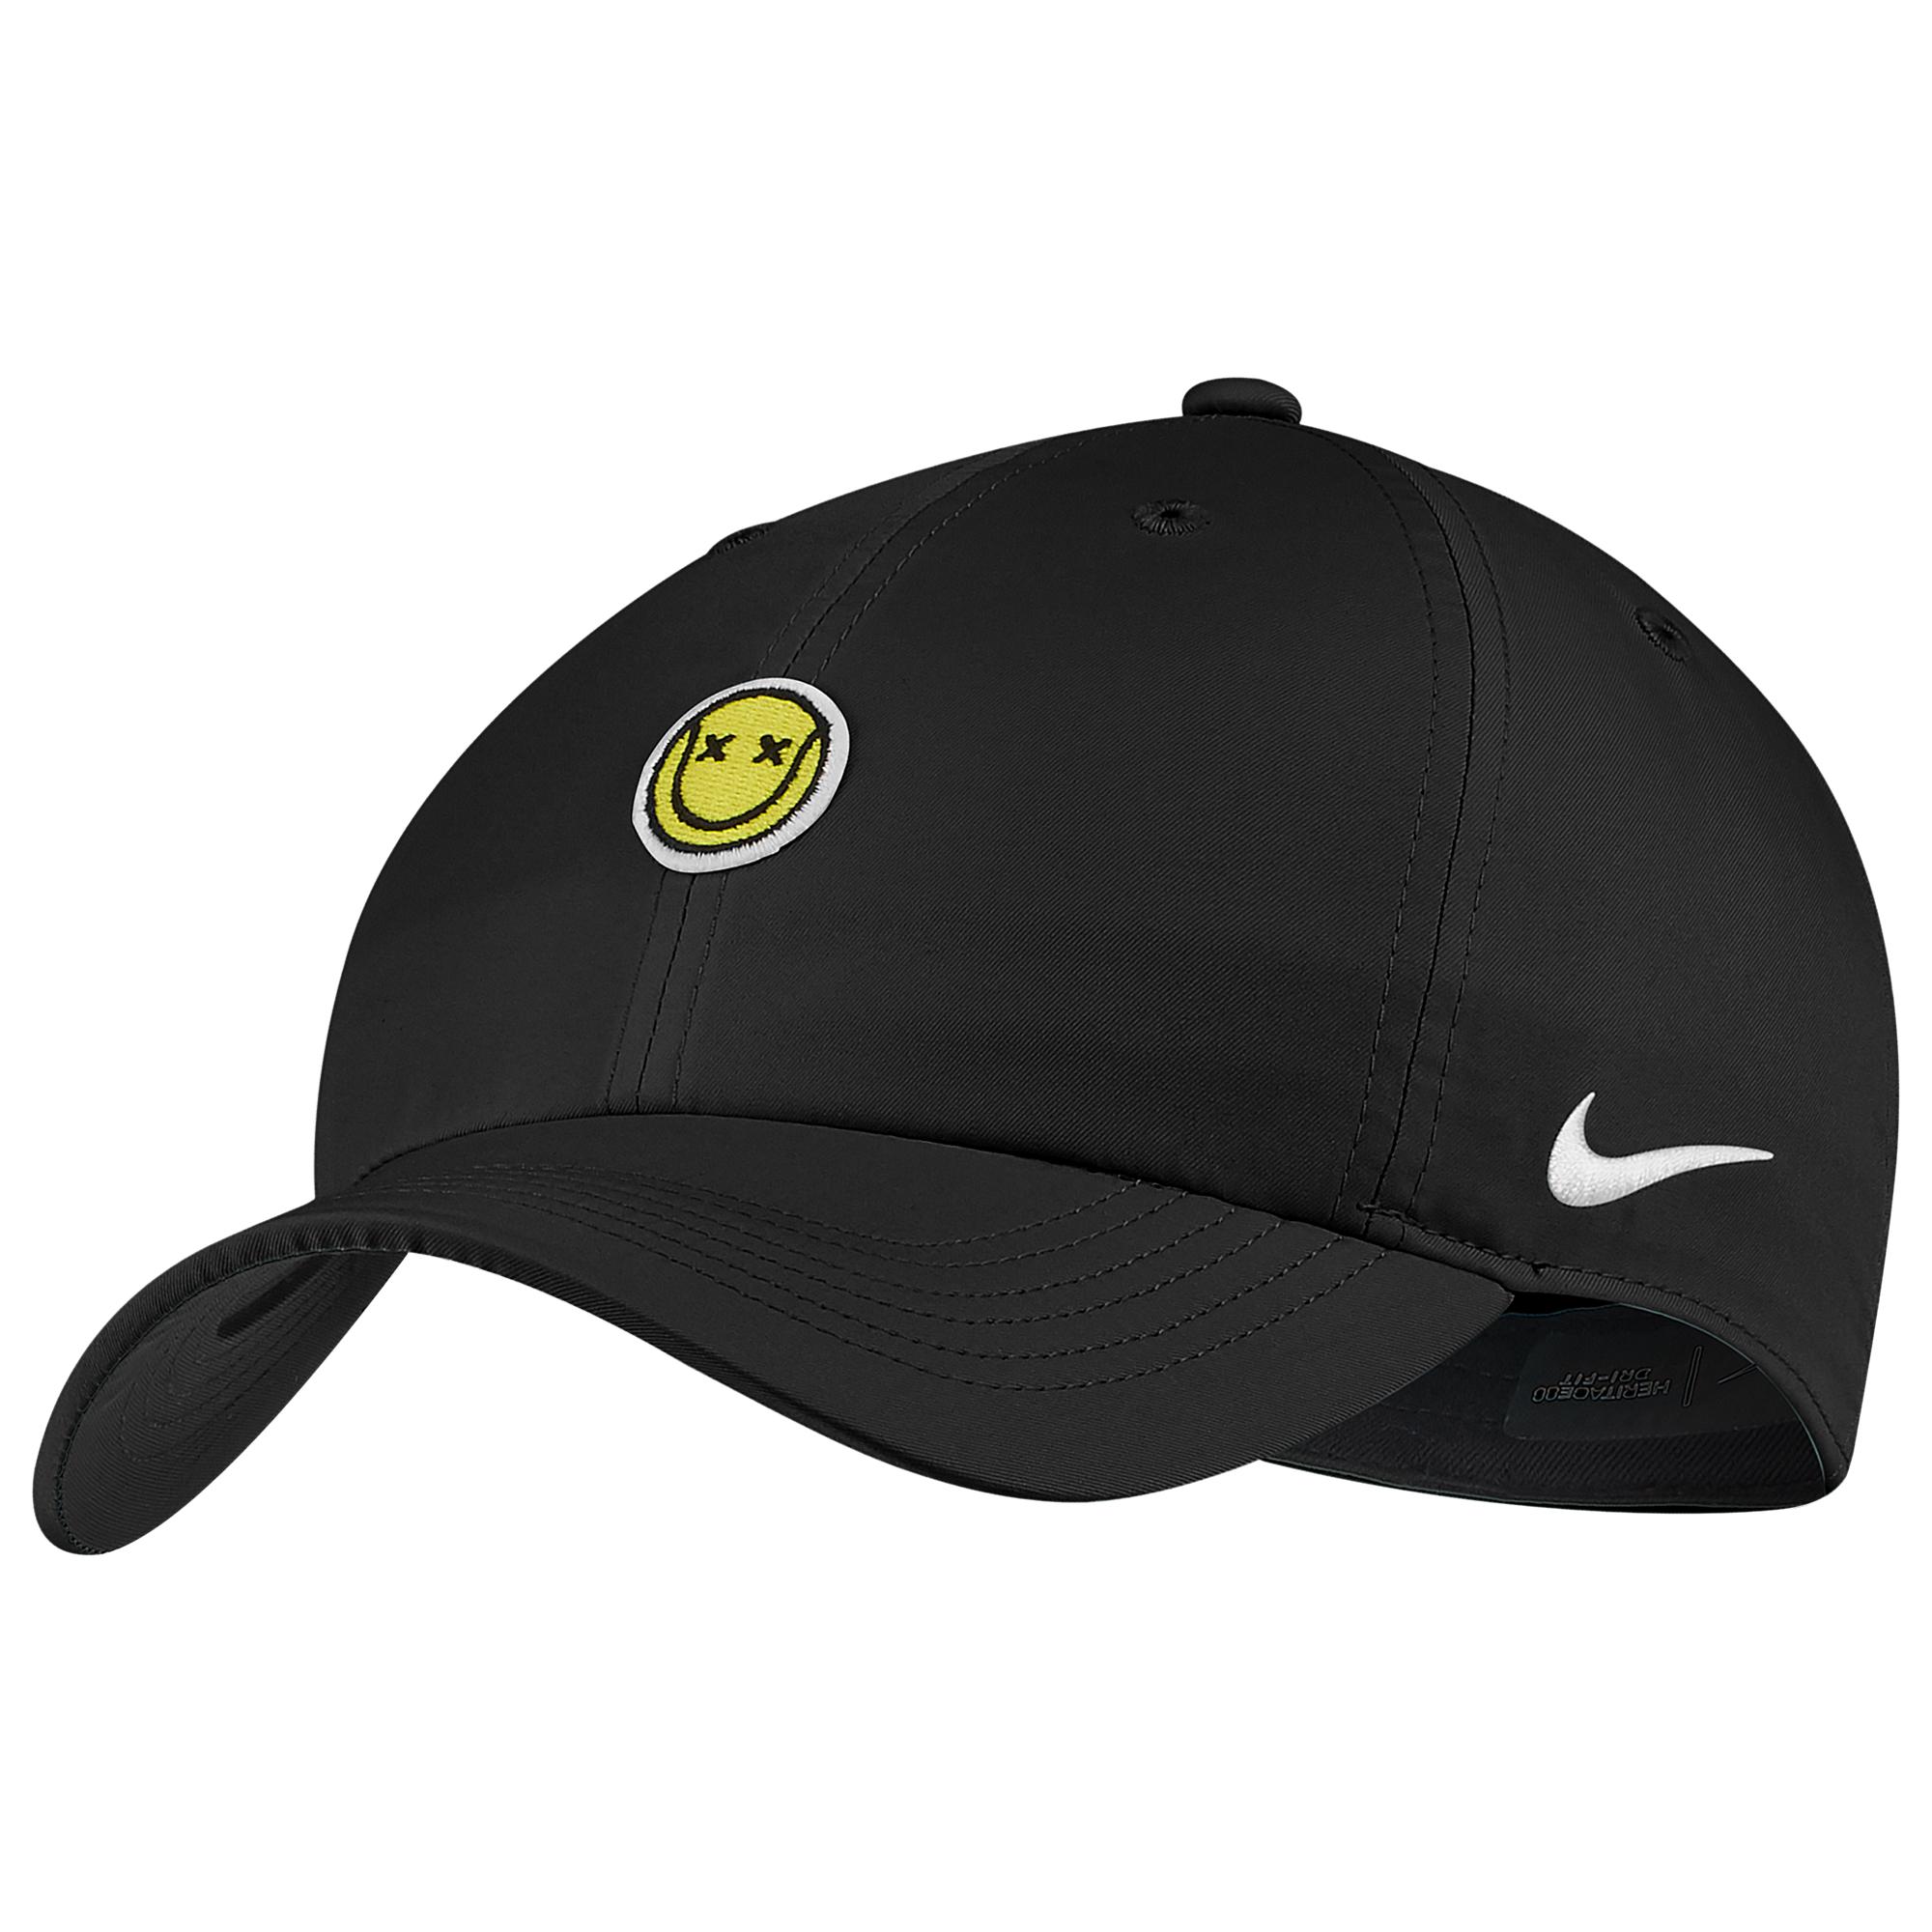 Nike Synthetic H86 Smiley Face Cap in 